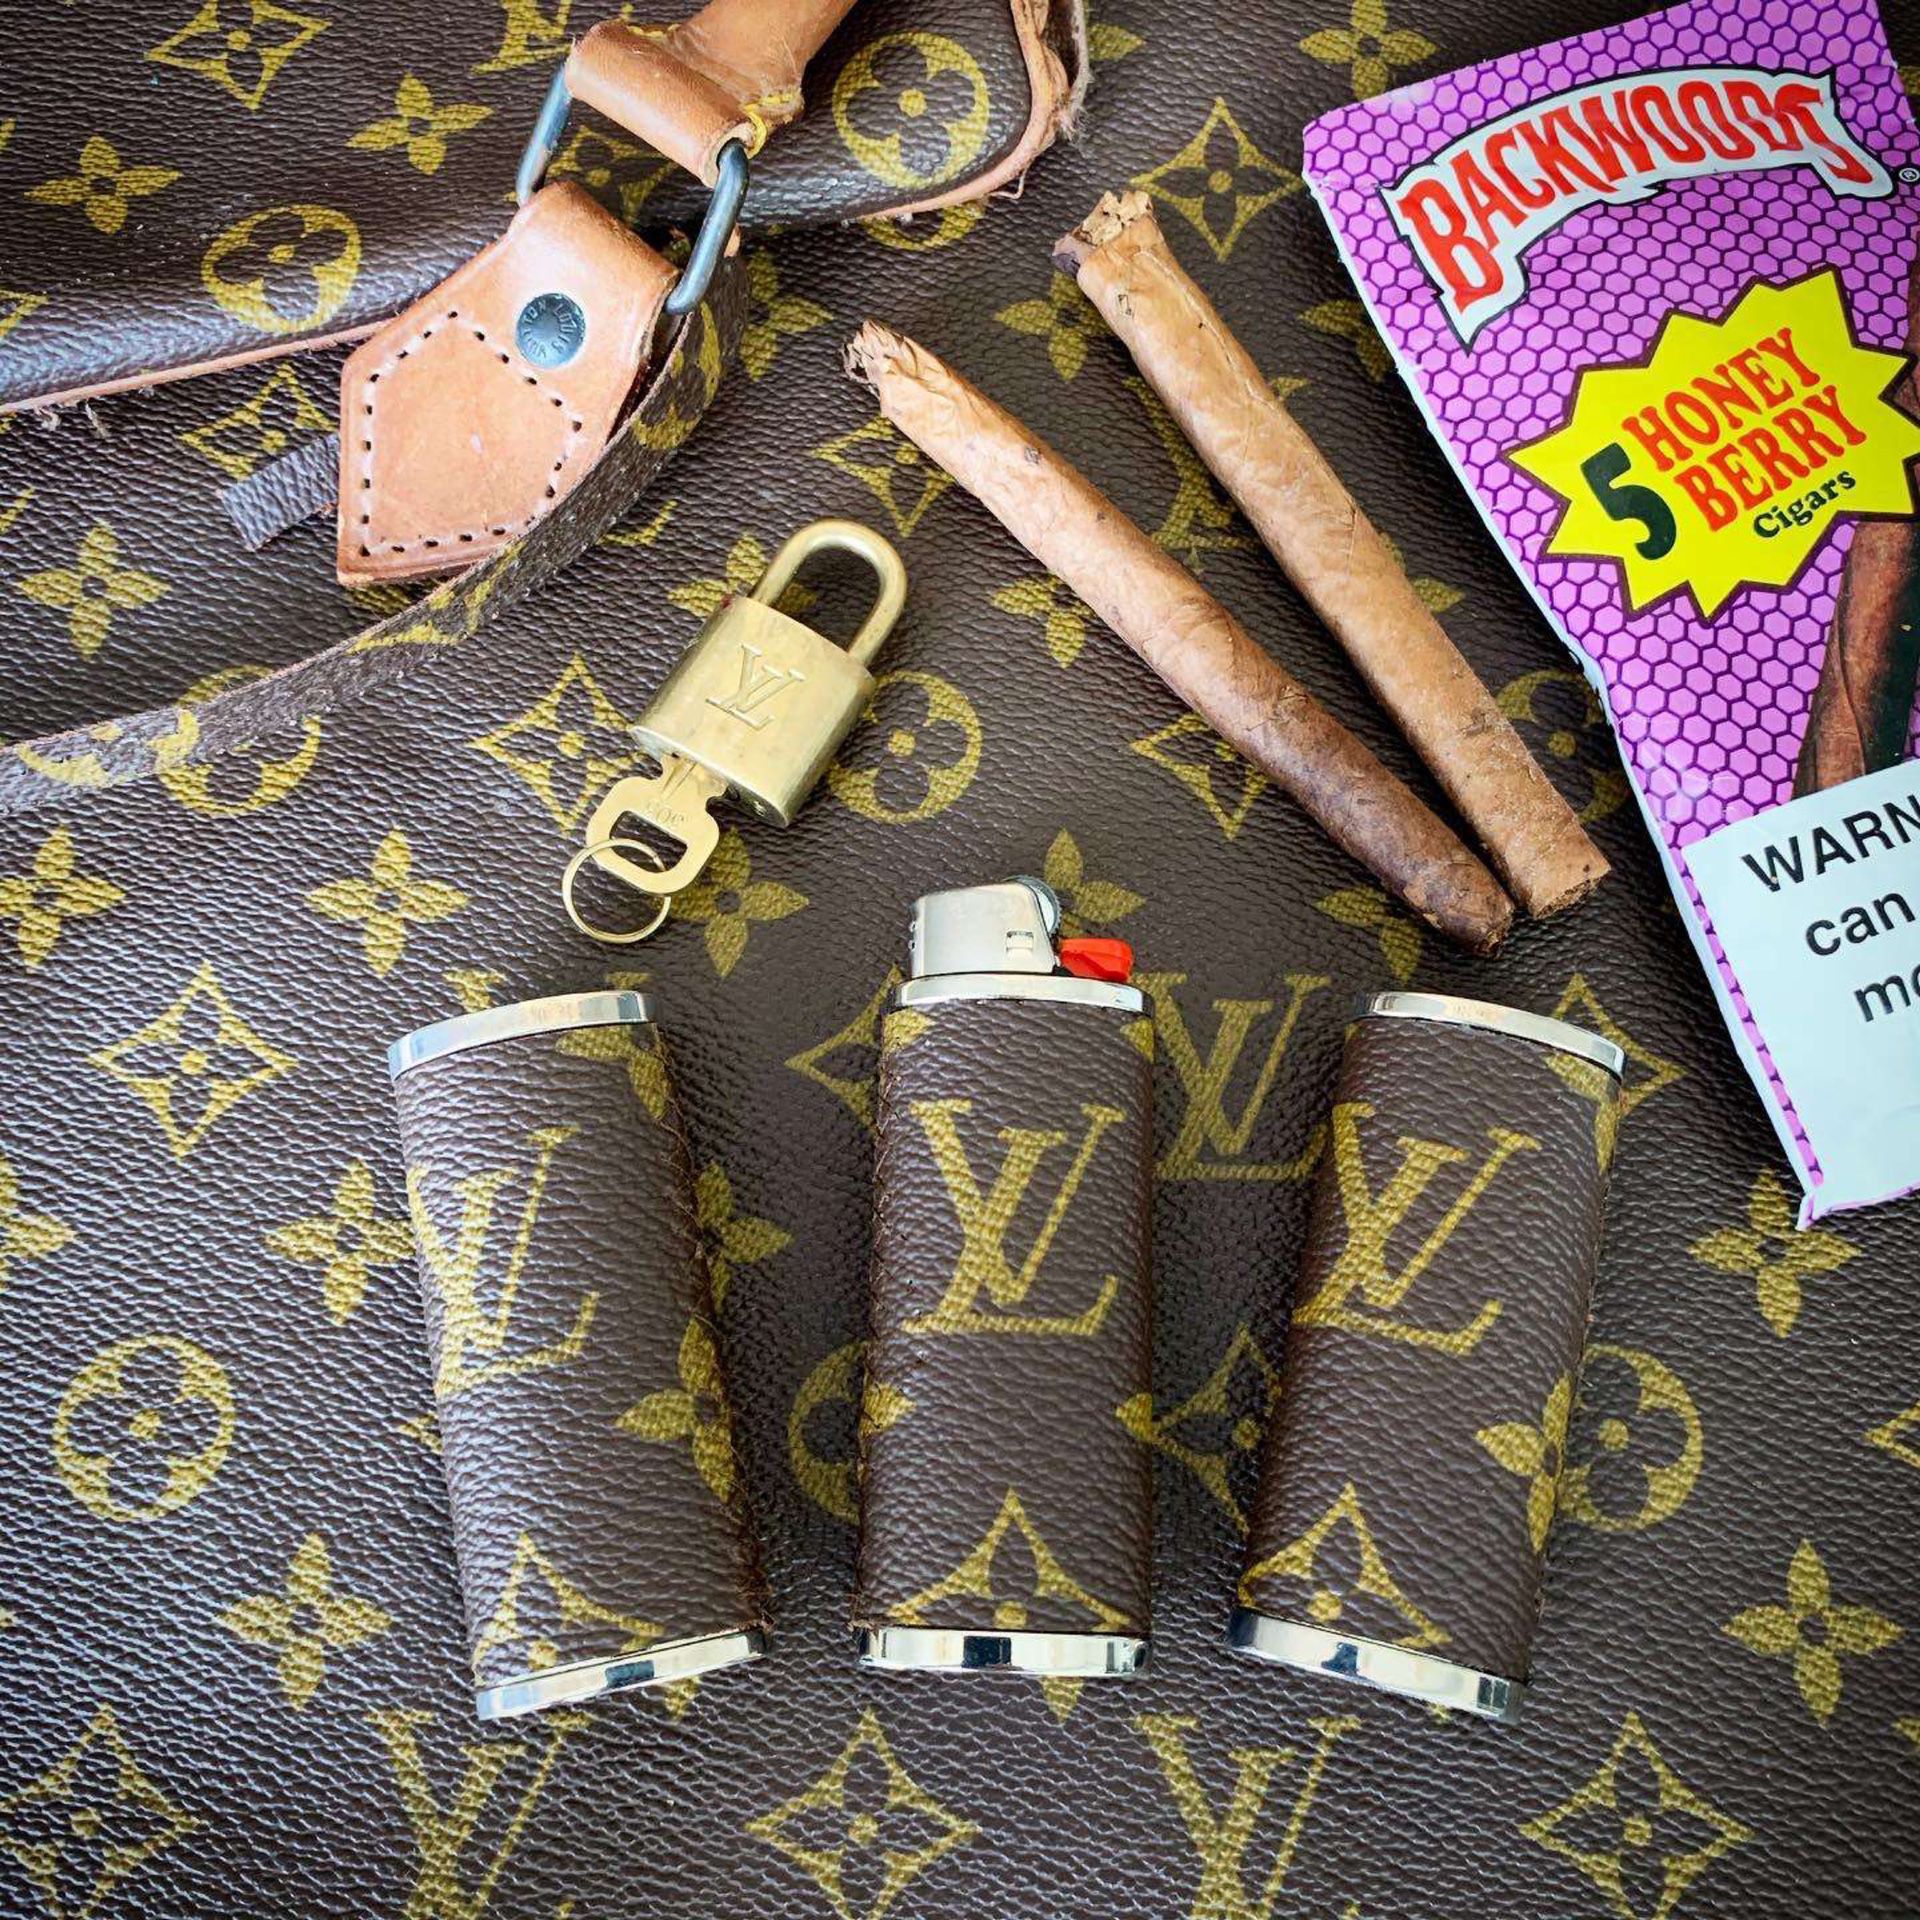 Louis Vuitton lighter sleeves for Sale in Visalia, CA - OfferUp